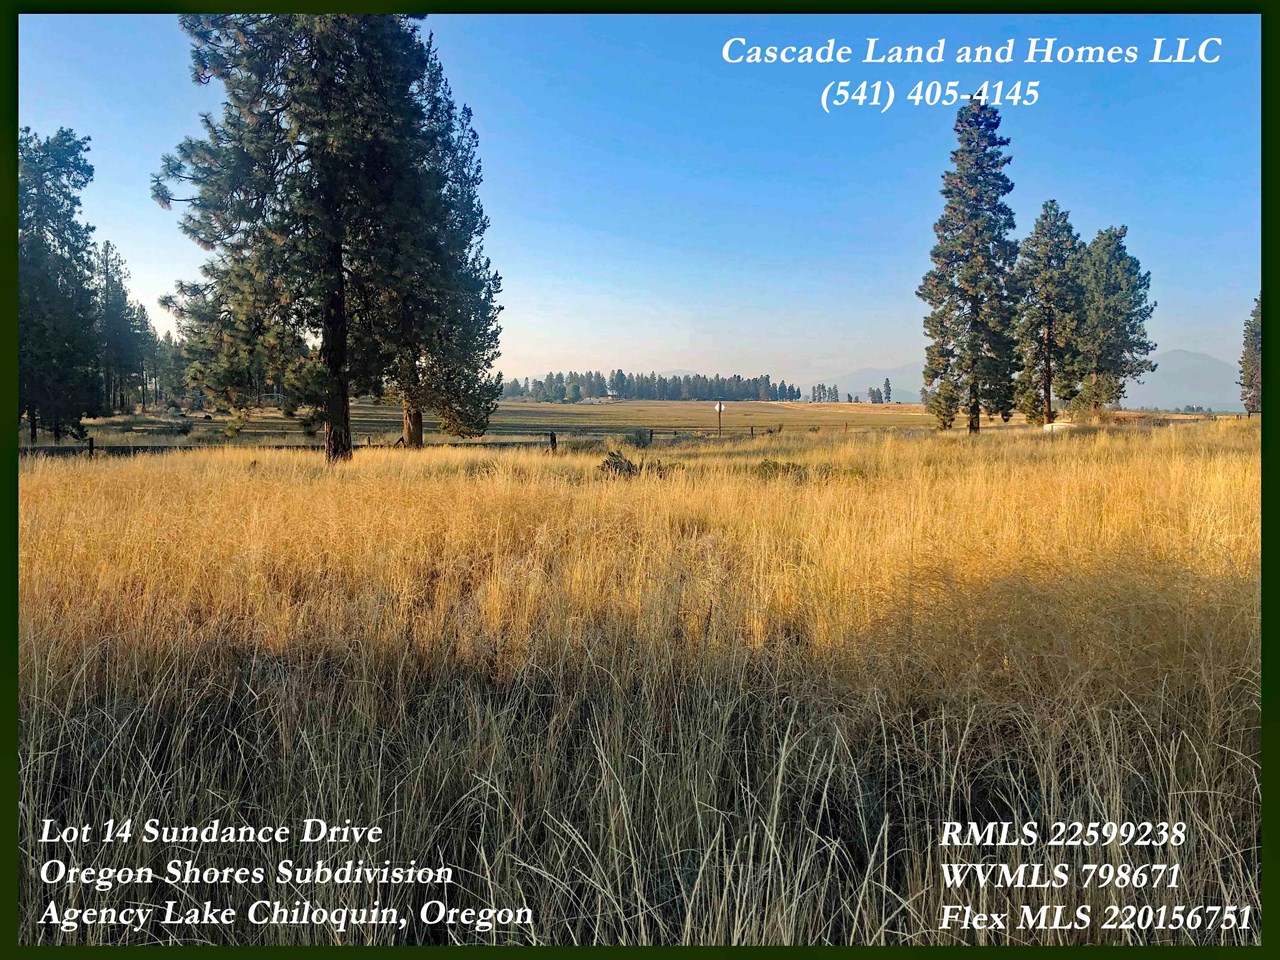 this photo is looking out across the property to the small family farms and foothills that surround the lake. if you are not looking for a place to build your permanent home yet, this would be an excellent place to build a vacation home for family to get out and enjoy the wilderness!